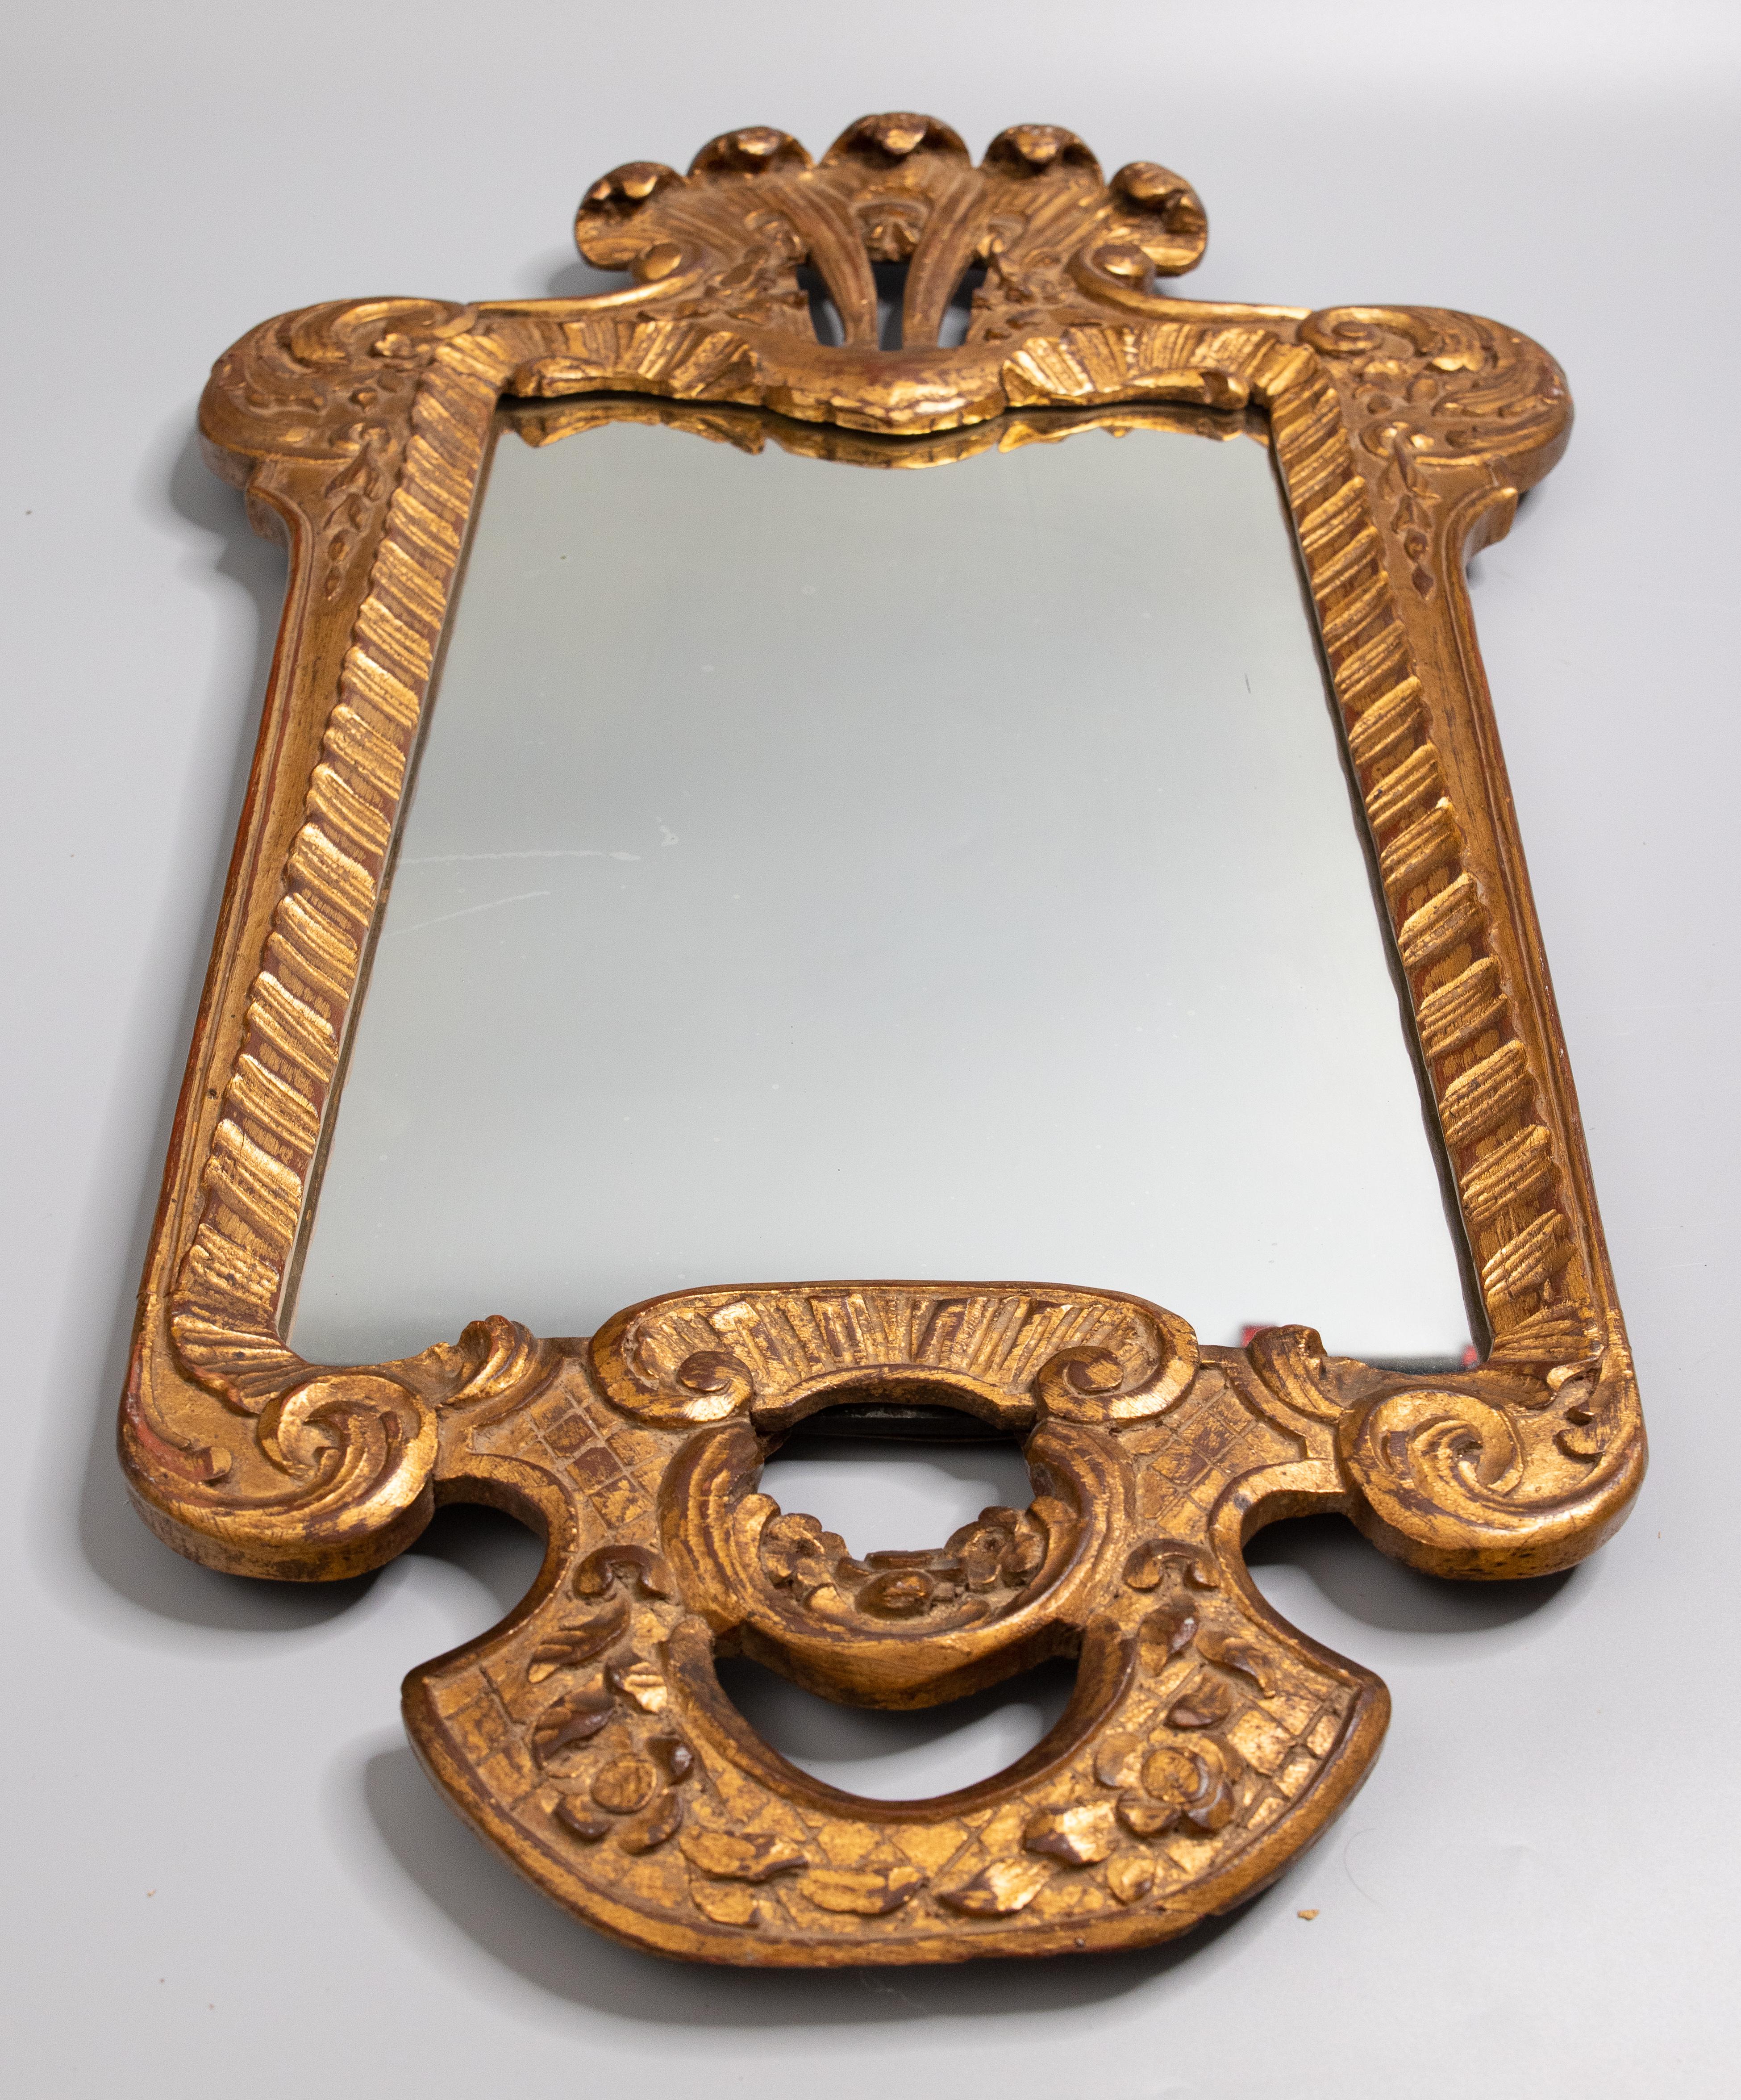 A superb antique 19th-Century French Louis XV style giltwood elaborately carved mirror with original glass, circa 1850. Signed by the maker on reverse. This lovely mirror has floral decorations and scroll designs in a beautiful gilt patina. It would